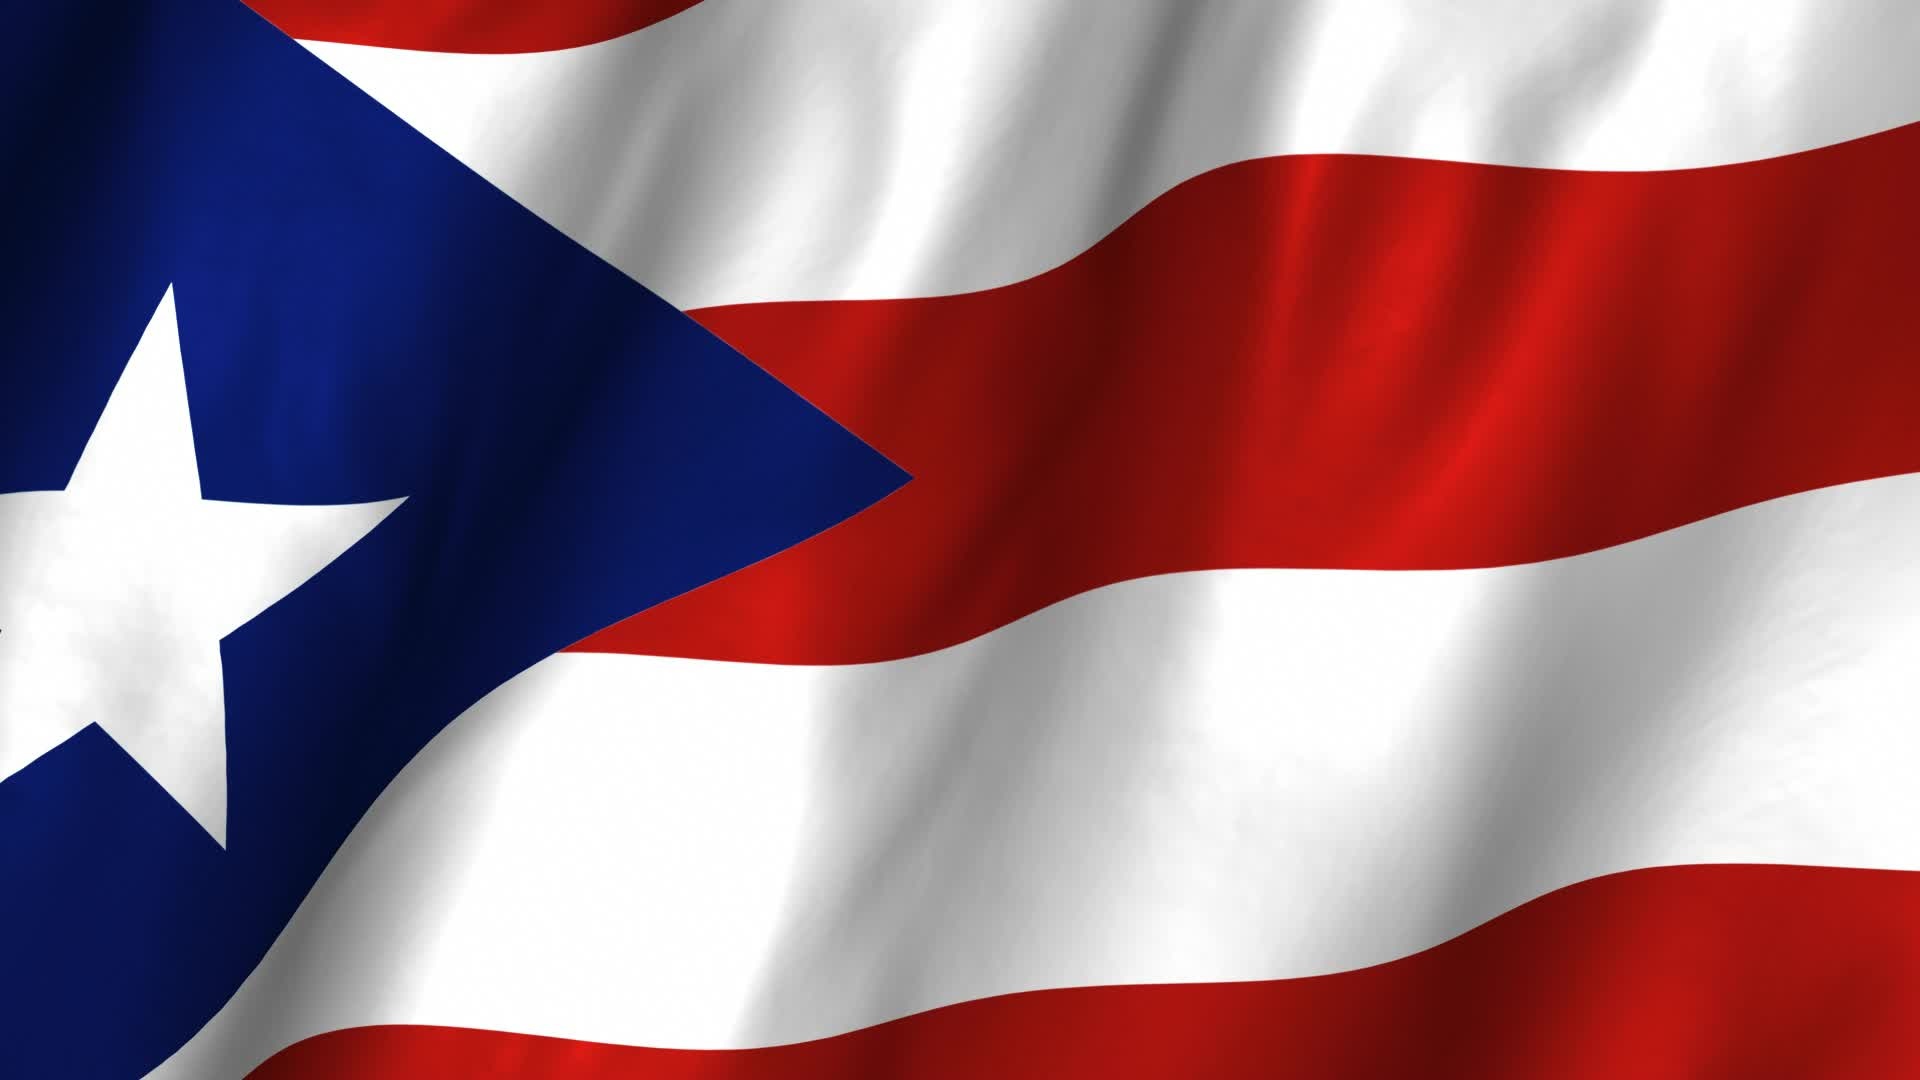 Flag of Puerto Rico, Wallpapers, HQ pictures, 4K, 1920x1080 Full HD Desktop